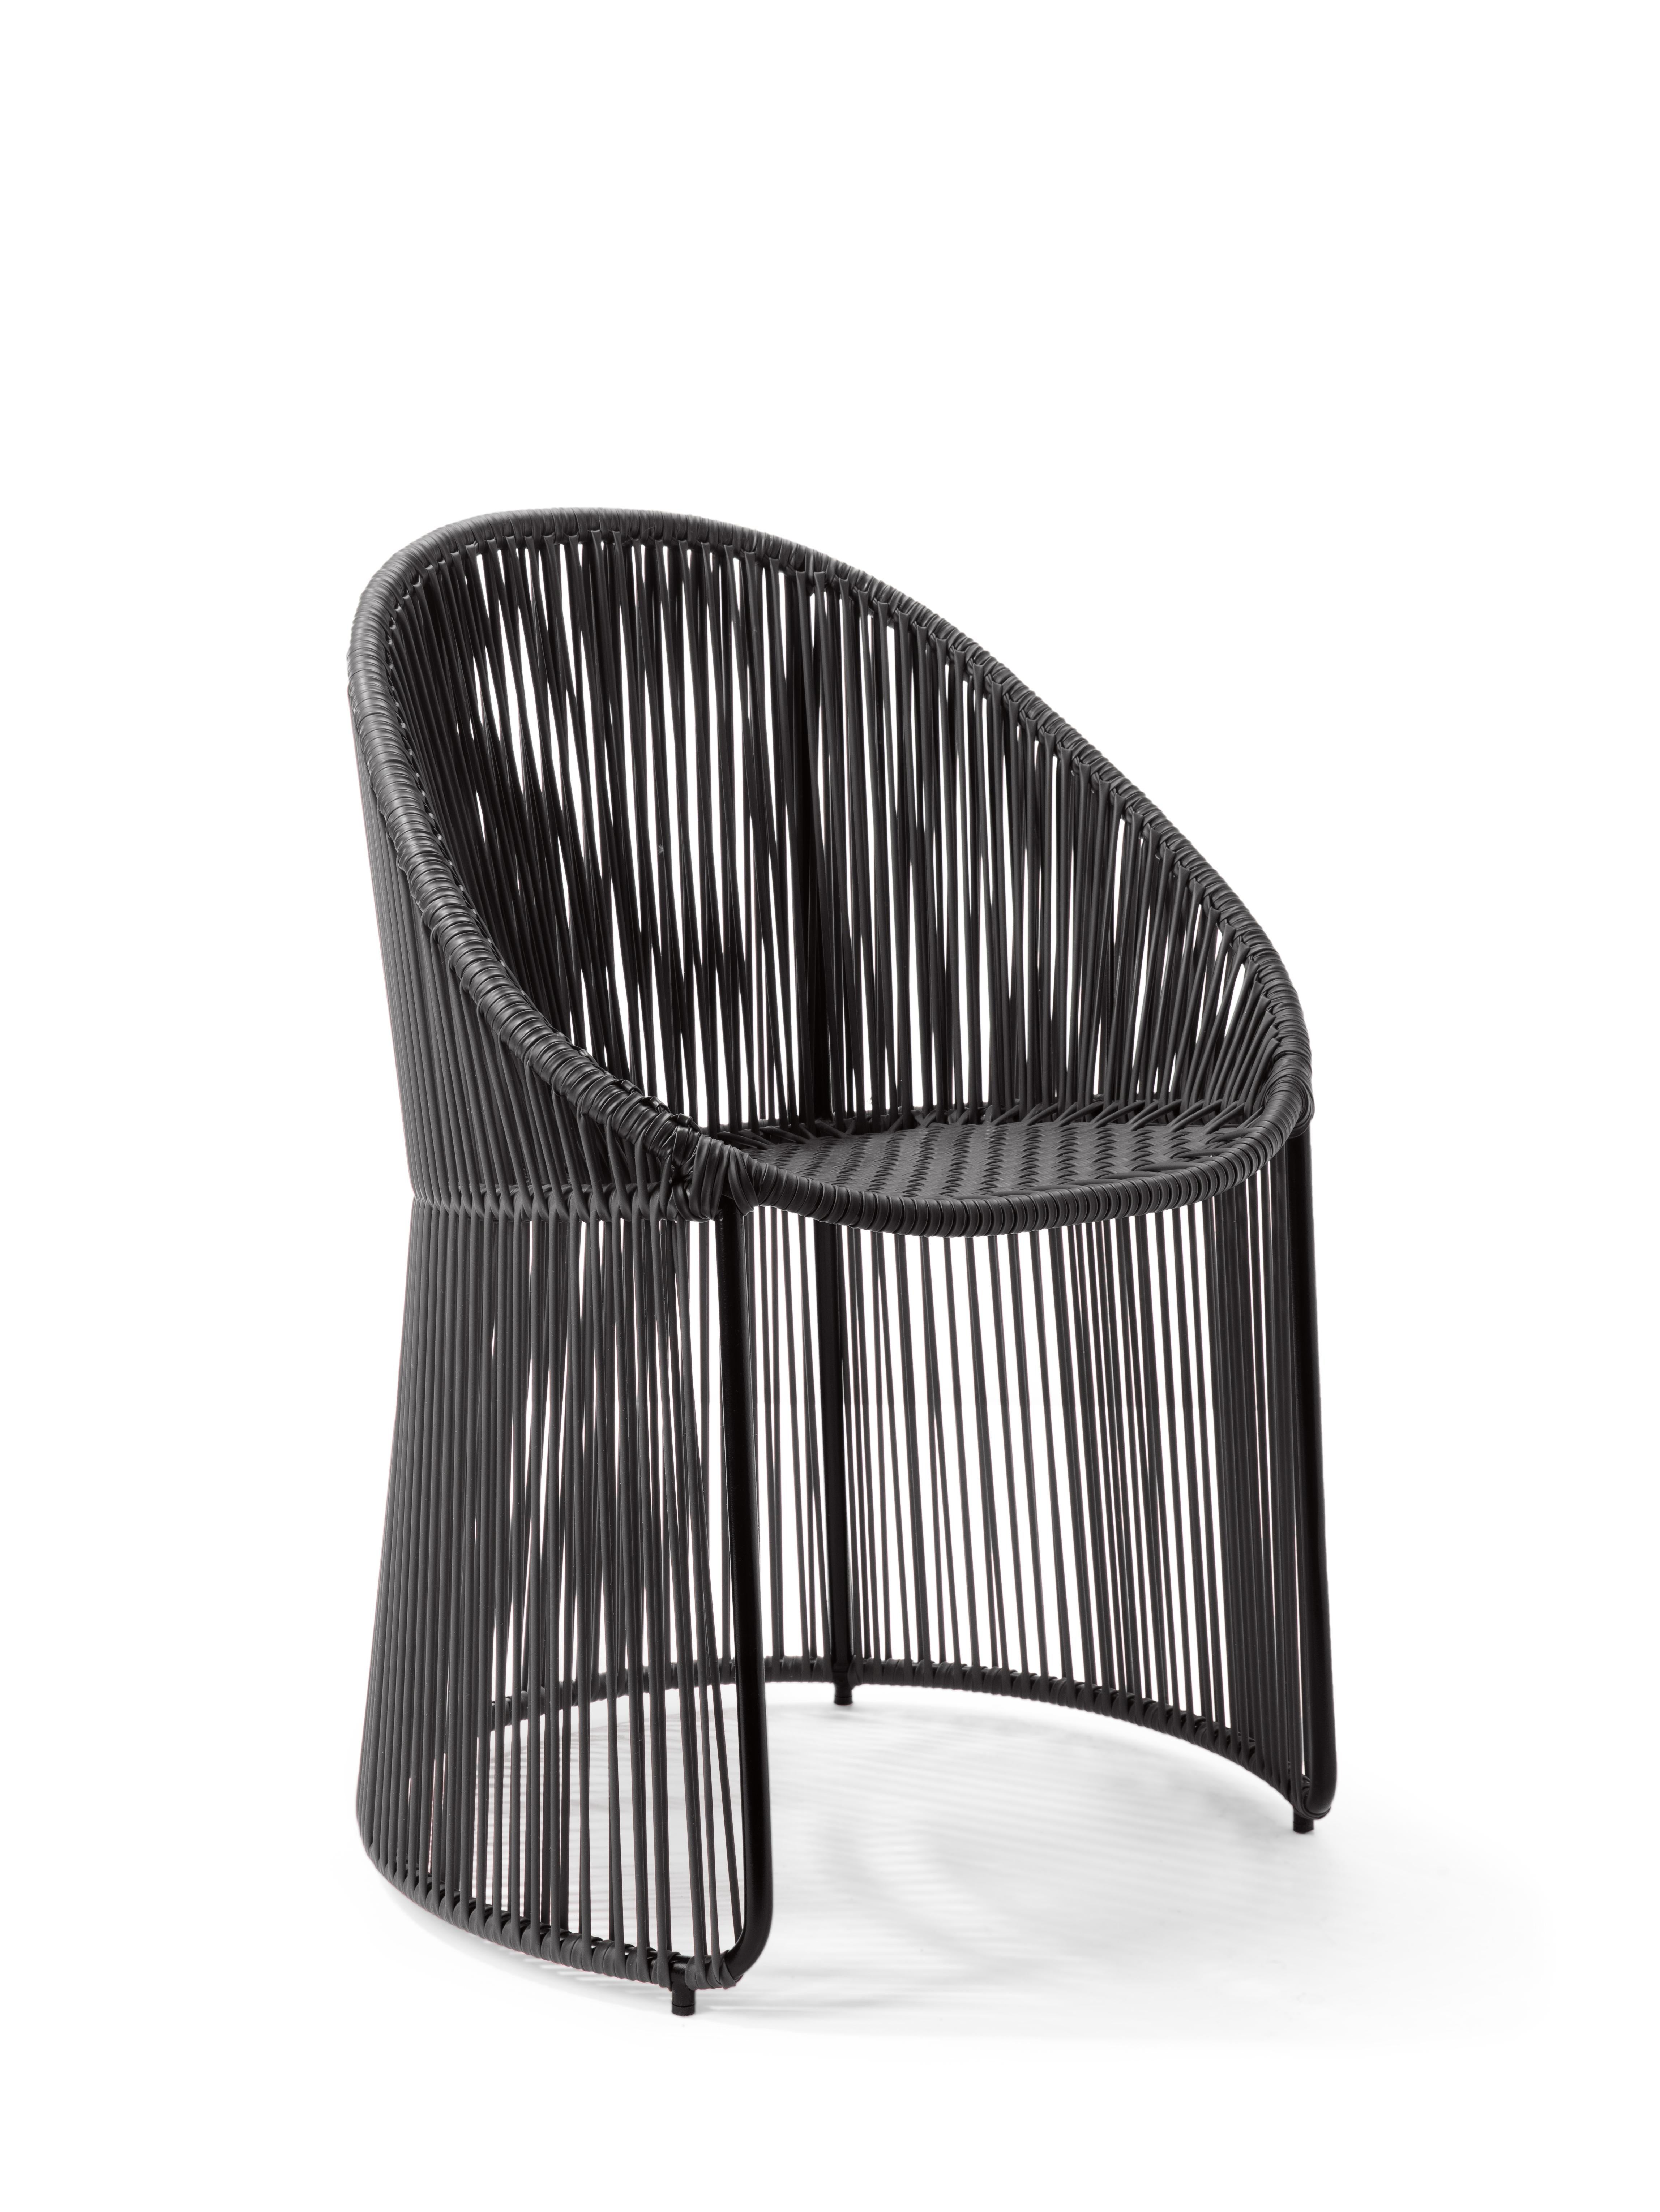 Set of 2 black cartagenas dining chair by Sebastian Herkner.
Materials: PVC strings. Galvanized and powder-coated tubular steel frame
Technique: made from recycled plastic. Weaved by local craftspeople in Colombia. 
Dimensions: W 60.2 x D 53.8 x